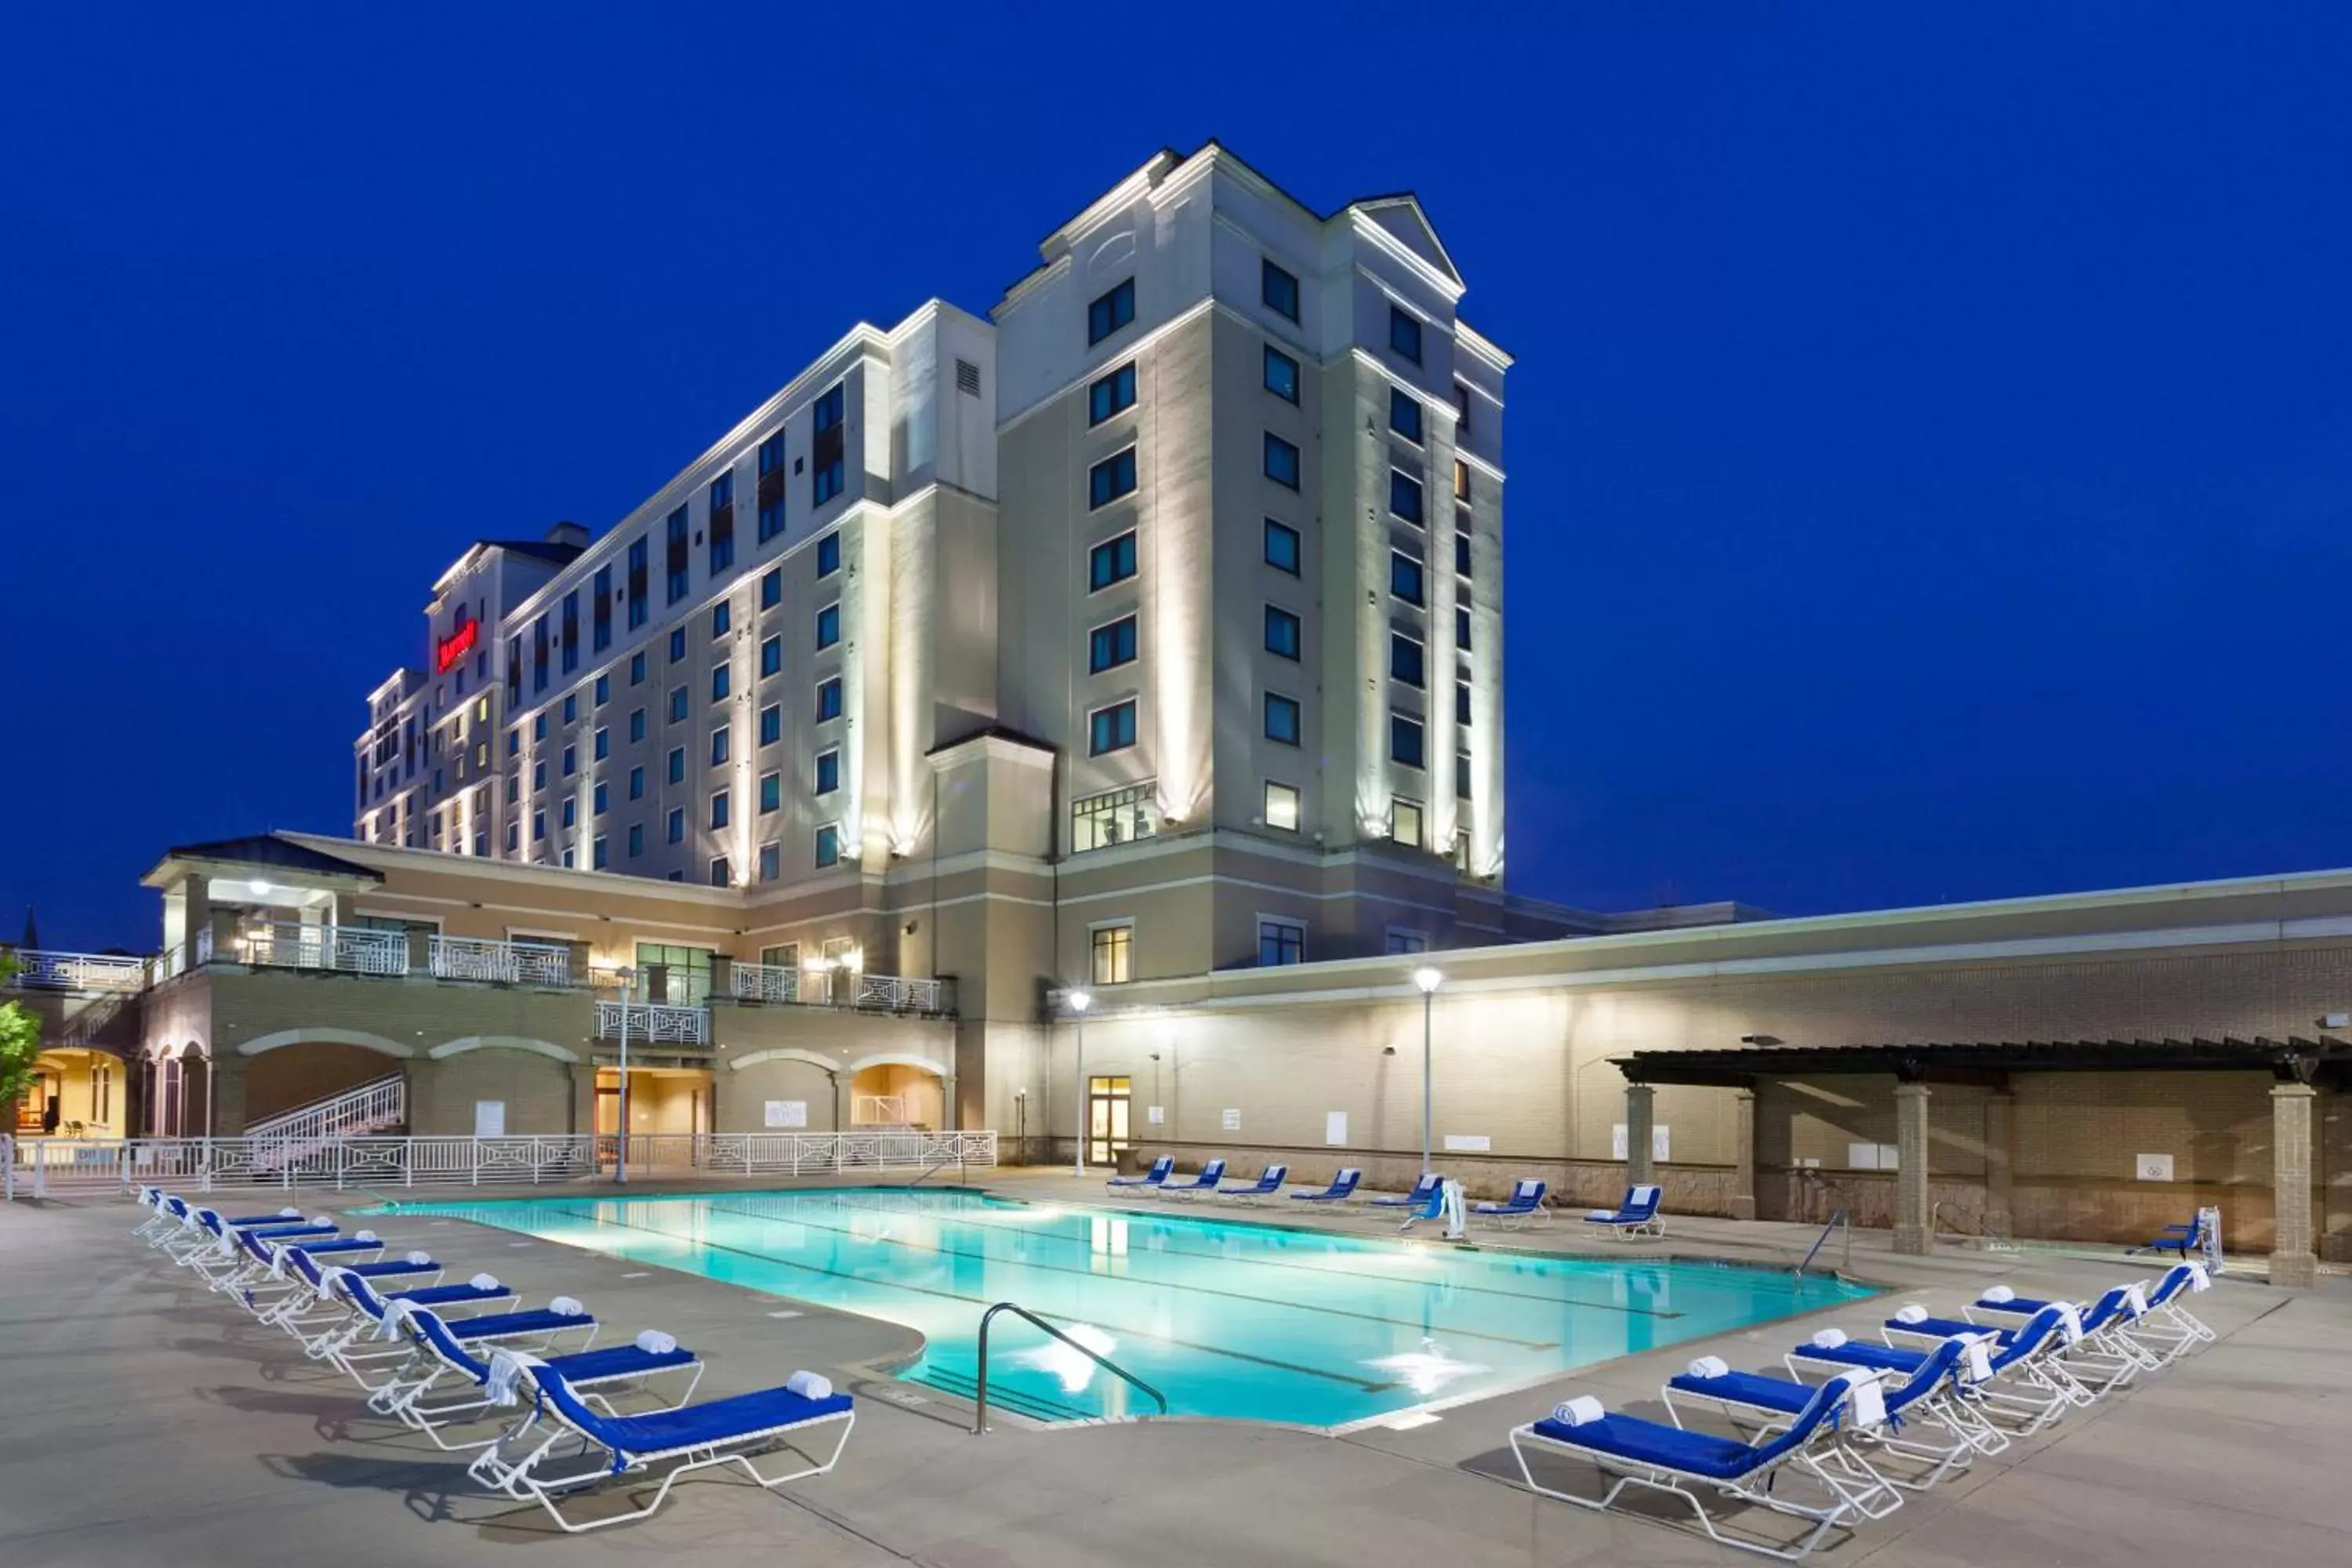 Swimming pool, Property Building in Spartanburg Marriott